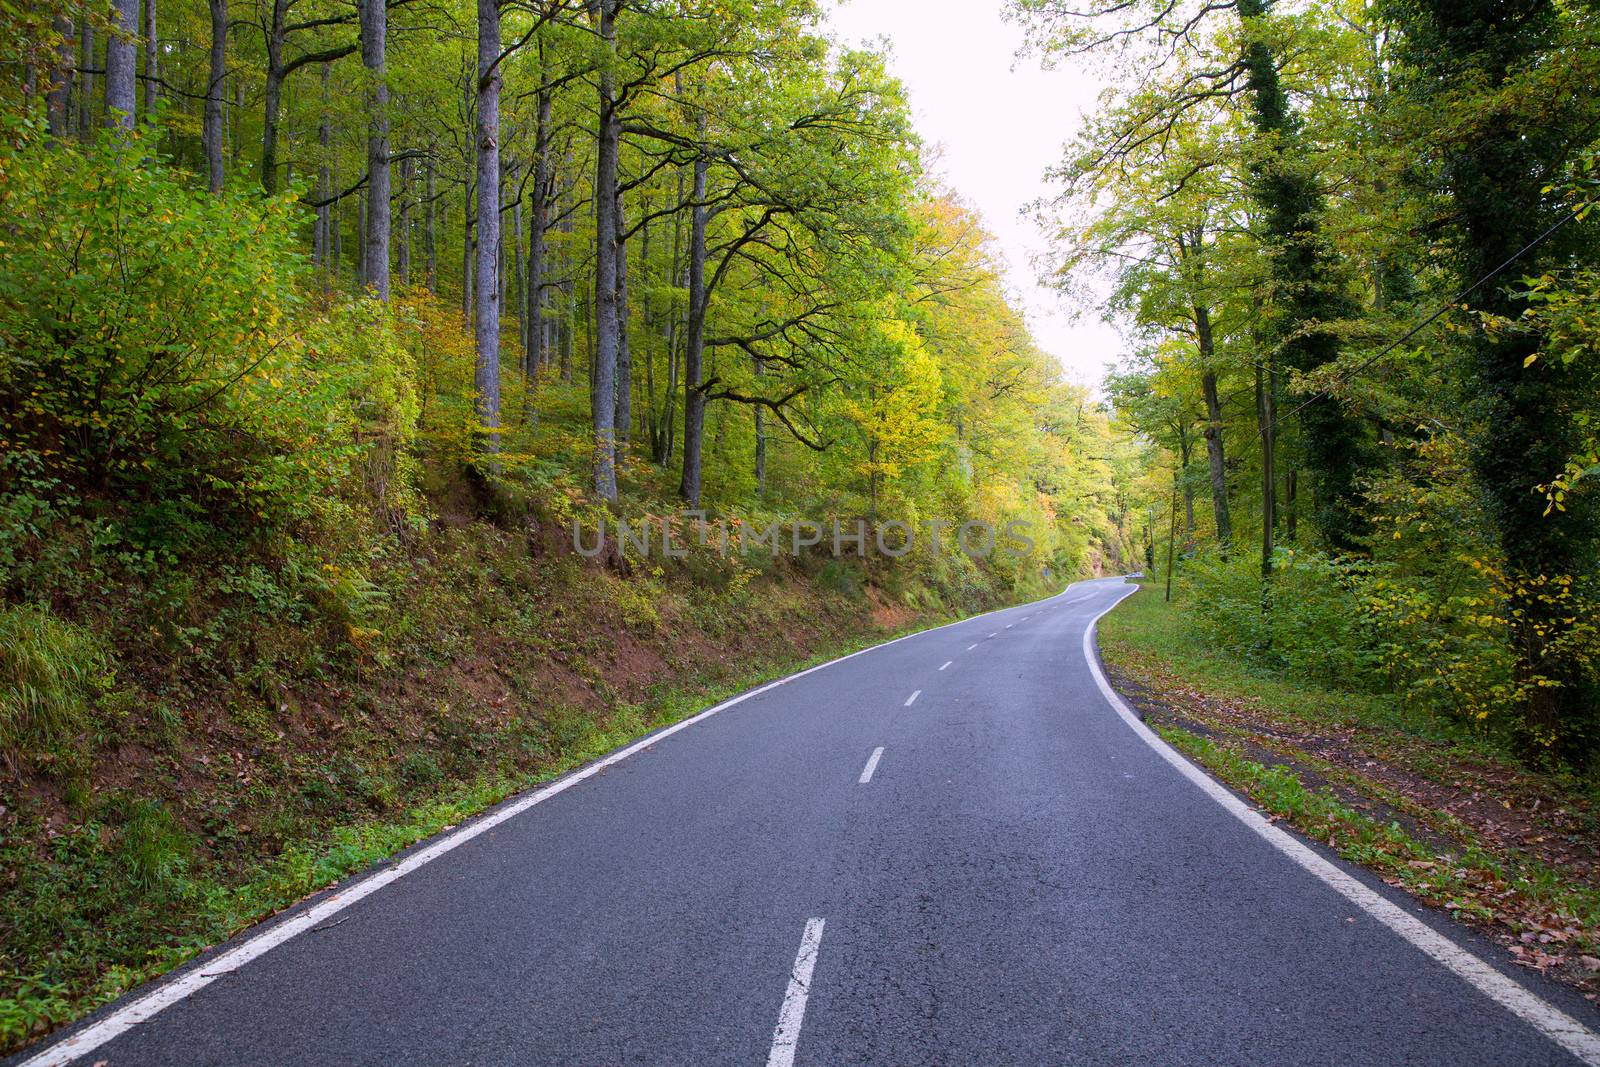 Pyrenees curve road in forest by lunamarina